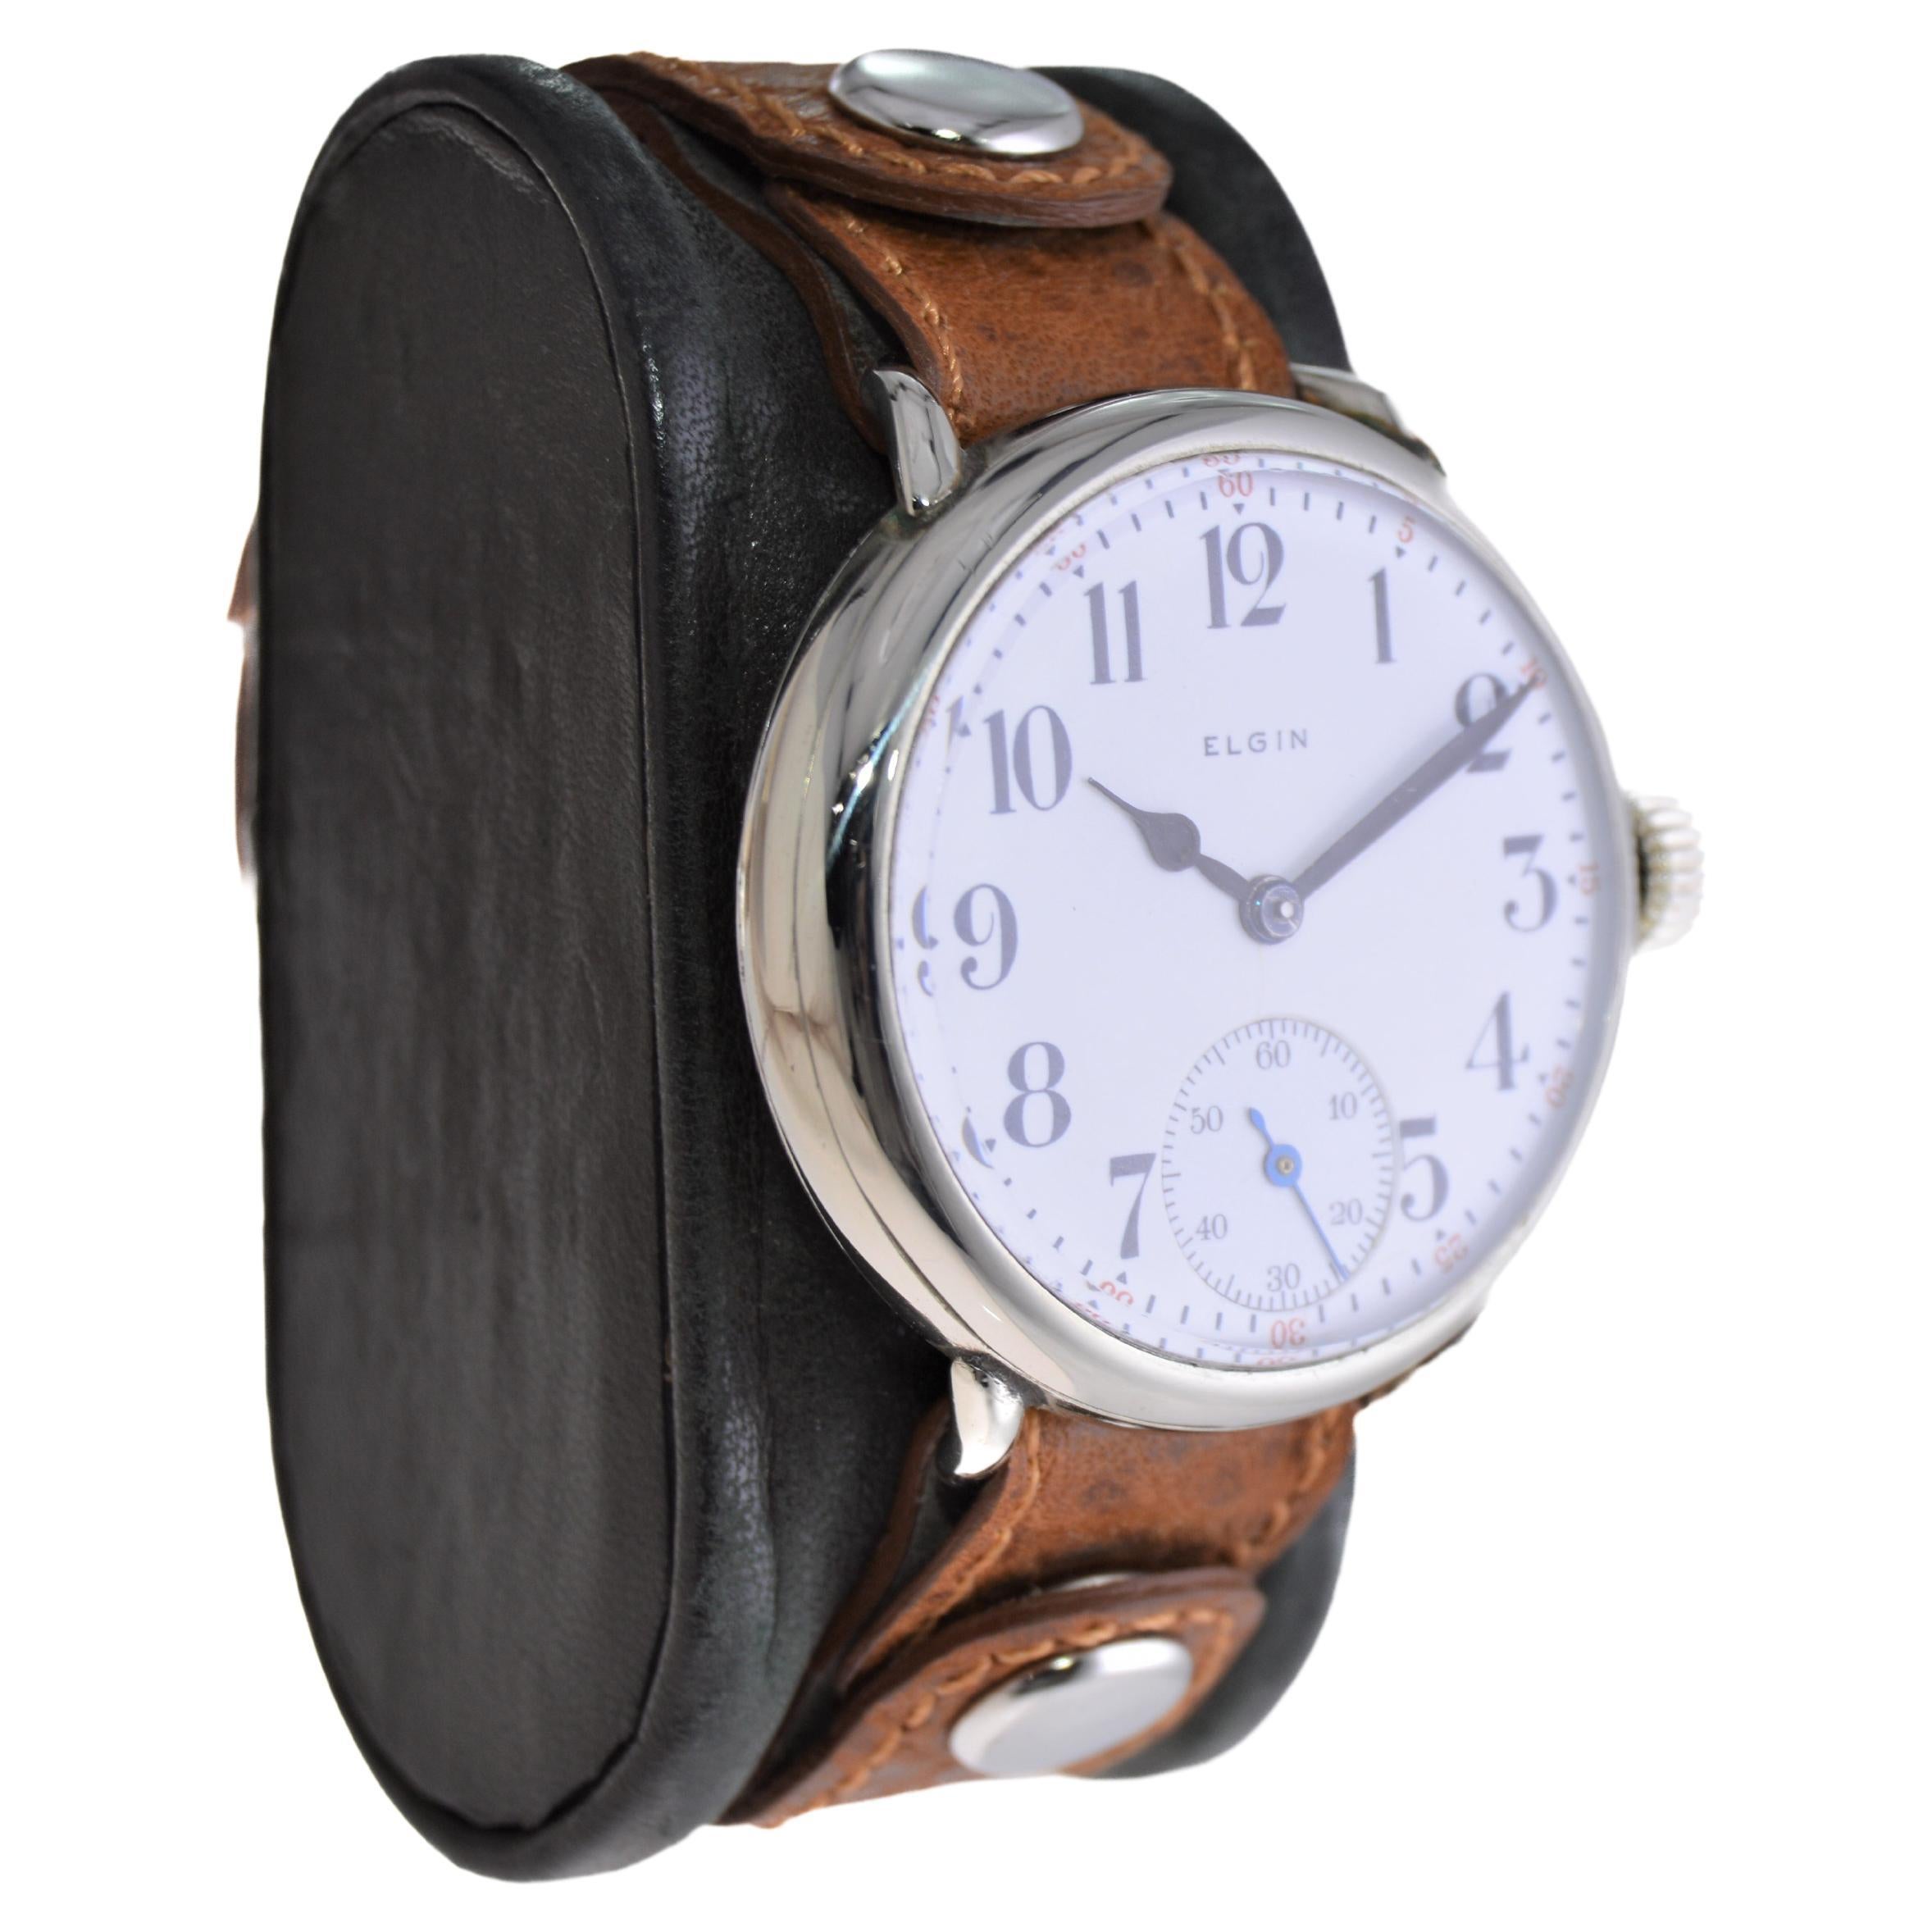 FACTORY / HOUSE: Elgin Watch Company
STYLE / REFERENCE: Campaign Style / W. W. 1 Trench Watch
METAL / MATERIAL: Nickel
CIRCA / YEAR: 1917
DIMENSIONS / SIZE: 40mm Length X 38mm Diameter
MOVEMENT / CALIBER: Manual Winding / 17 Jewels / Caliber 
DIAL /